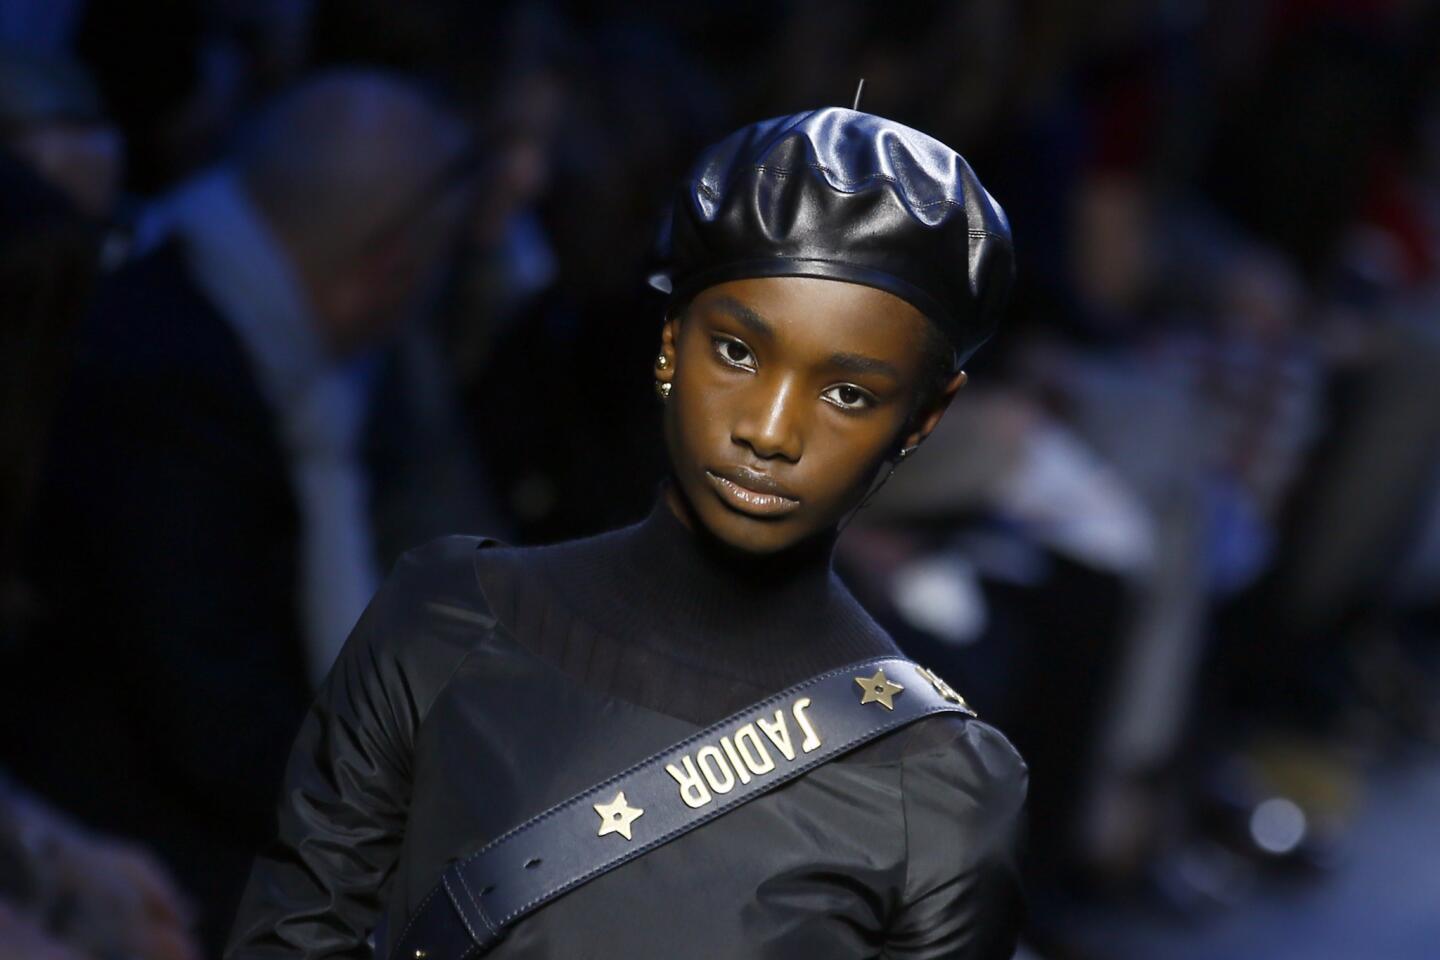 Berets made a statement on a number of Paris runways. This black leather one at the Dior show looks particularly revolutionary.